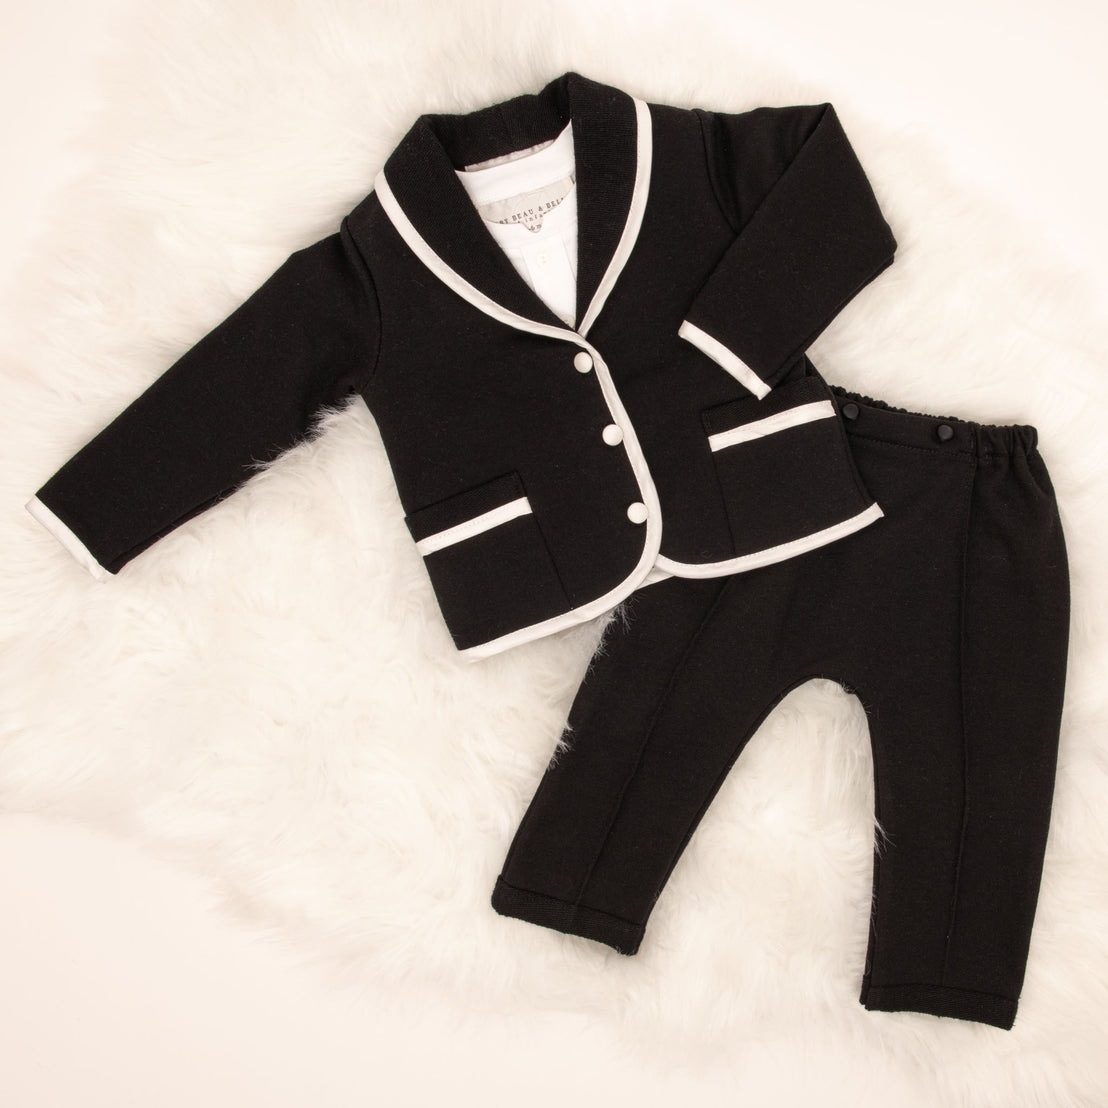 Flat lay of the black James 3-Piece Suit, including the Jacket, Pants and Onesie.